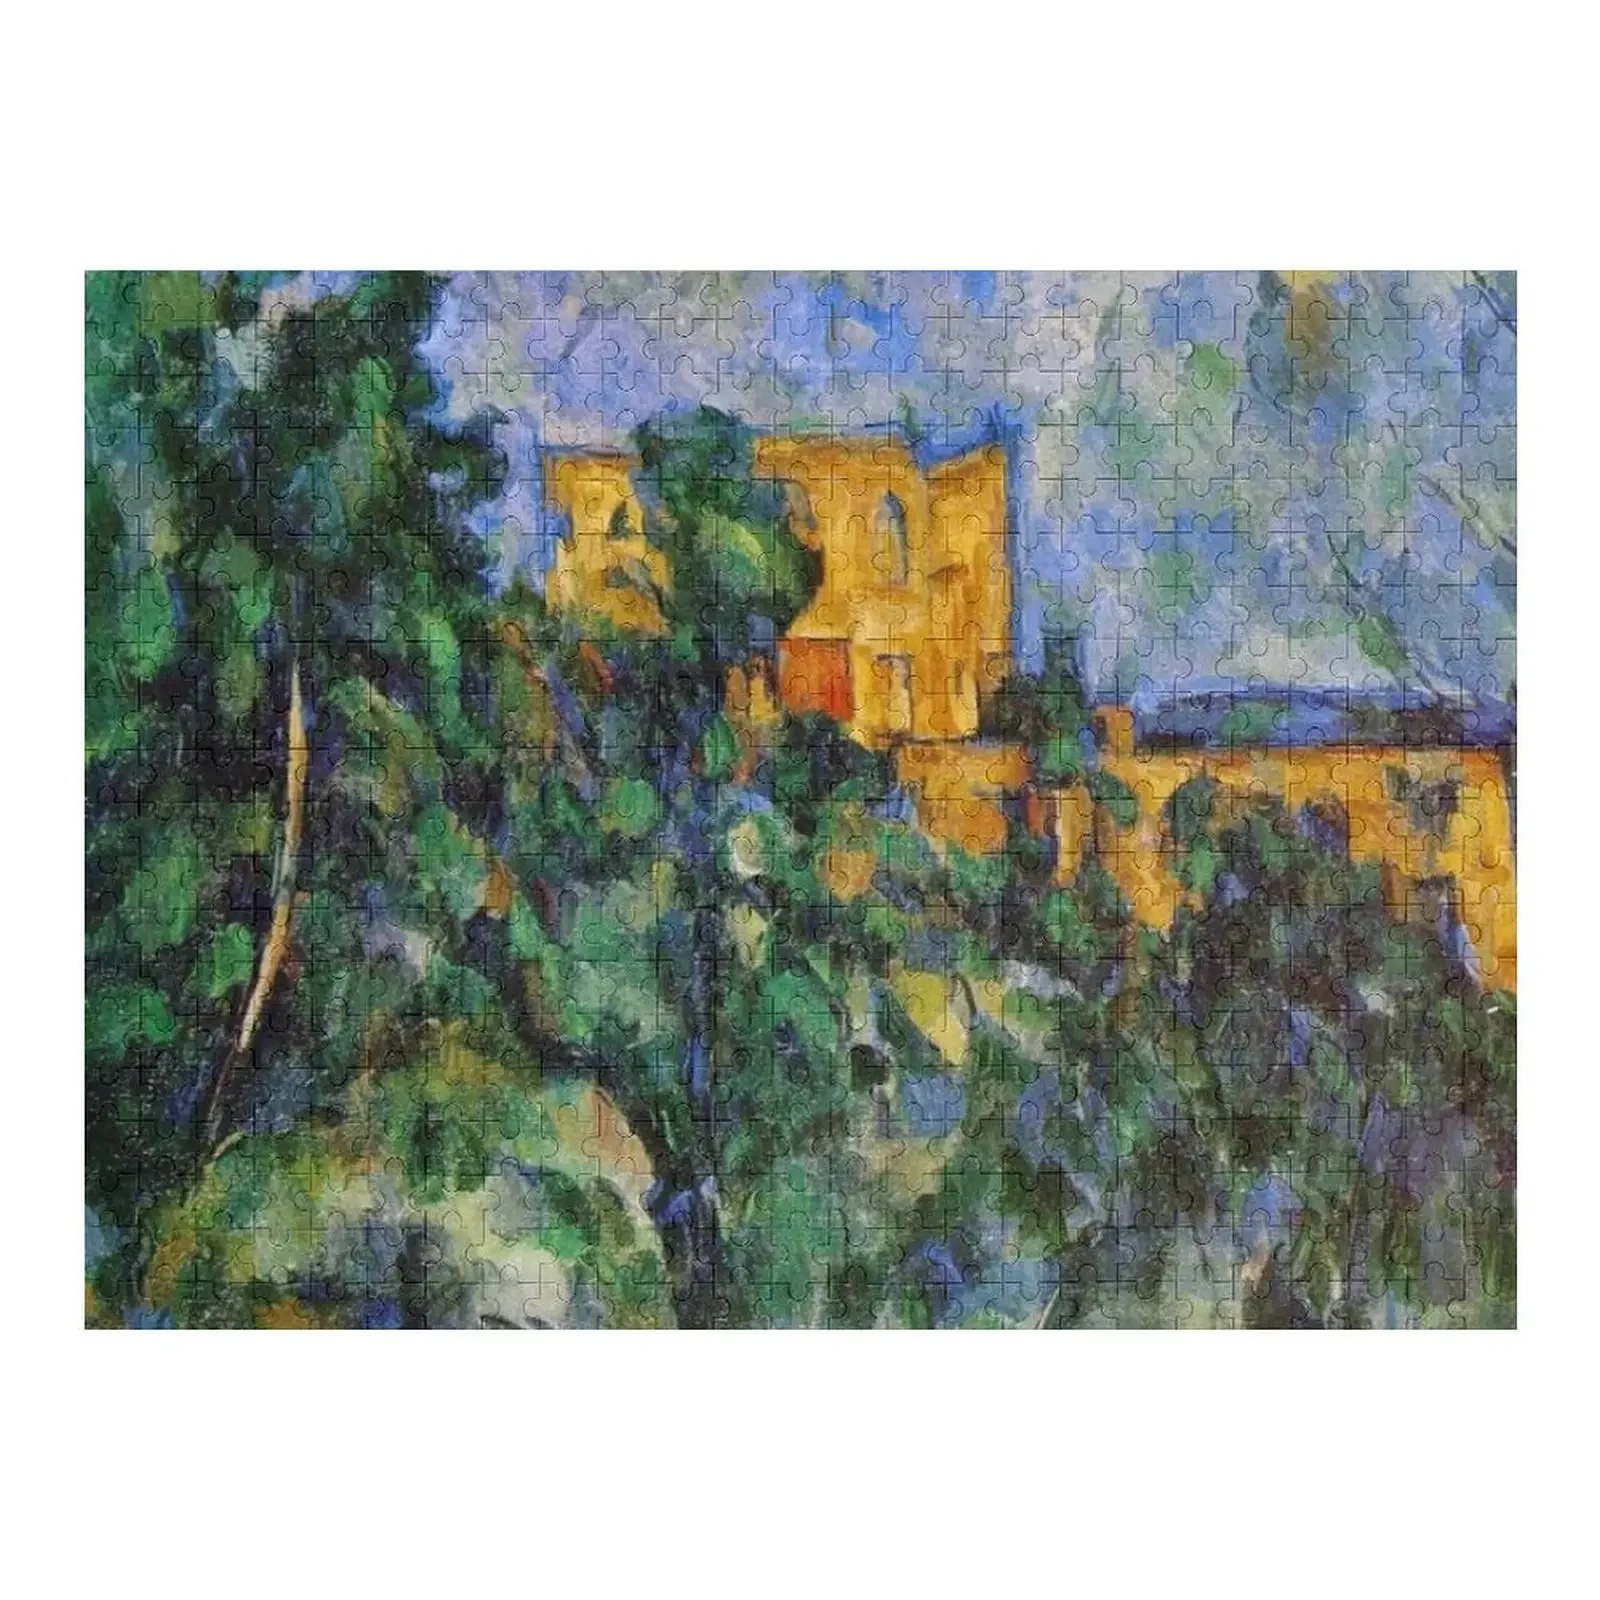 Chateau noir paul cezanne artwork drawing Jigsaw Puzzle Personalized Toy Wood Adults With Personalized Photo Wooden Name Puzzle paul cezanne masterpieces of art